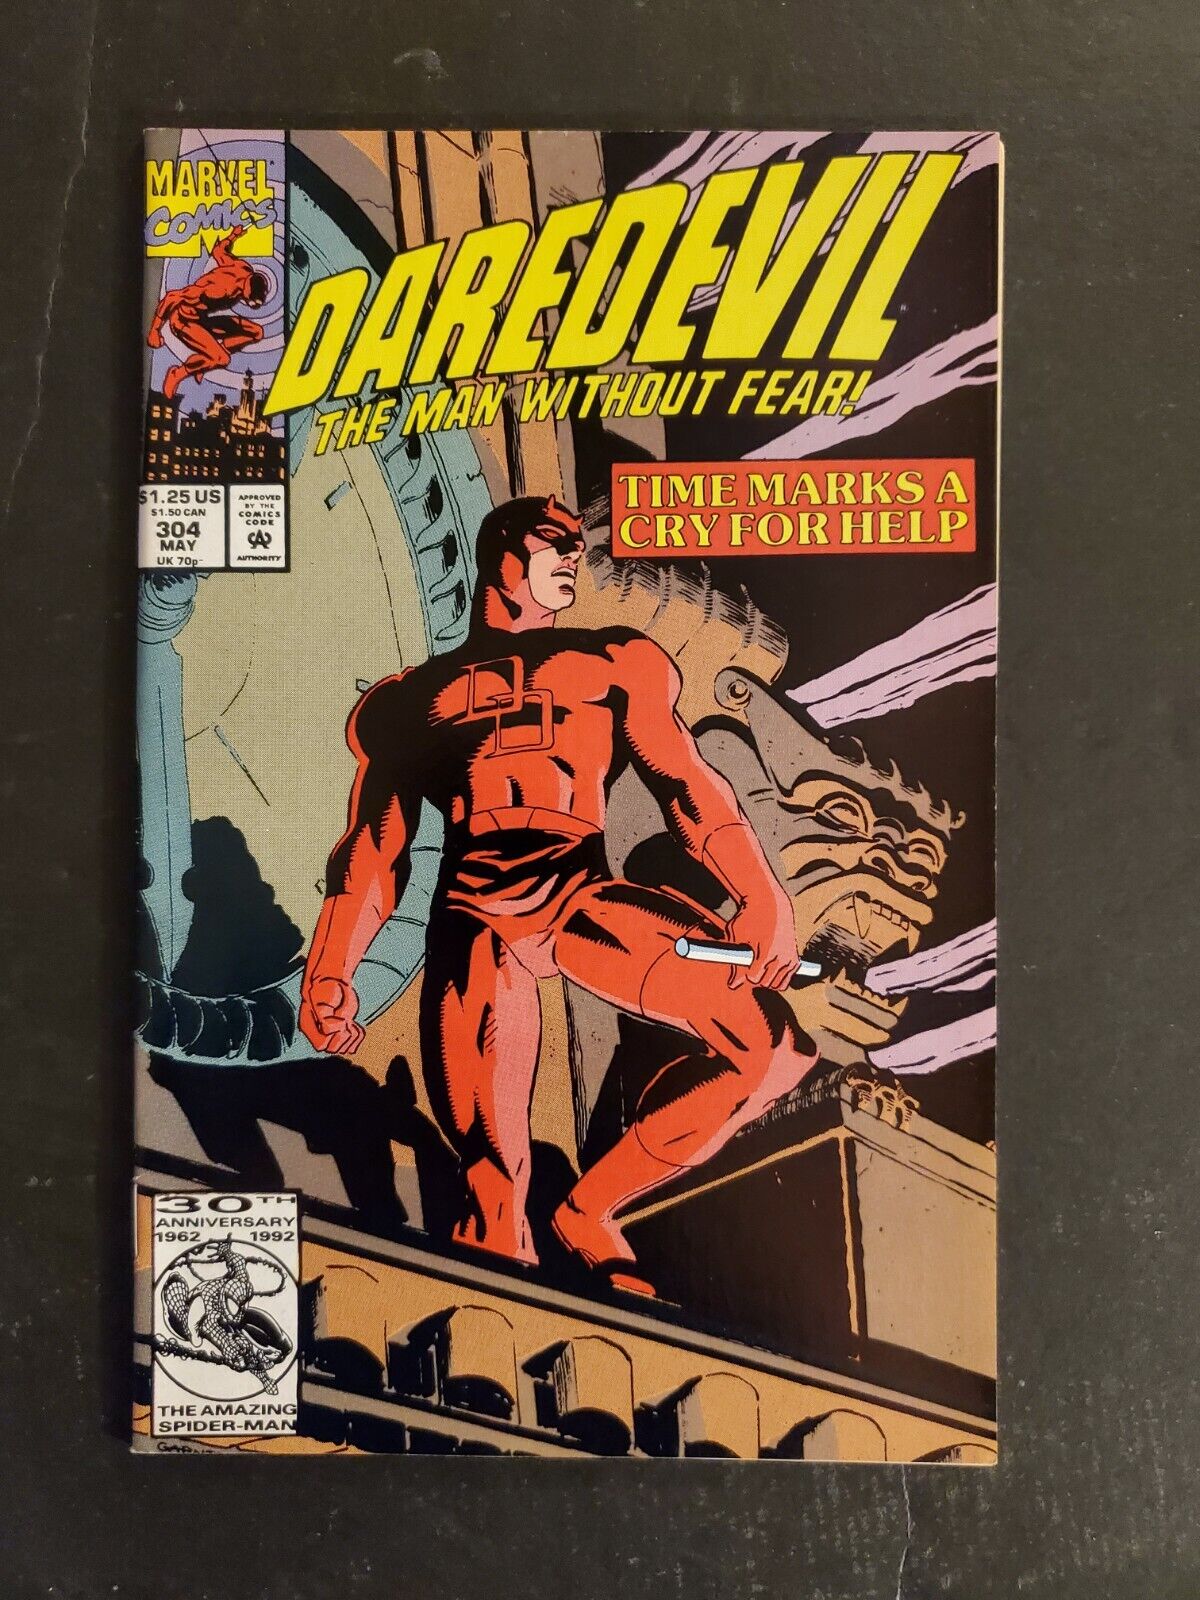 Daredevil #304 (May, 1992, Marvel) Time Marks A Cry For Help